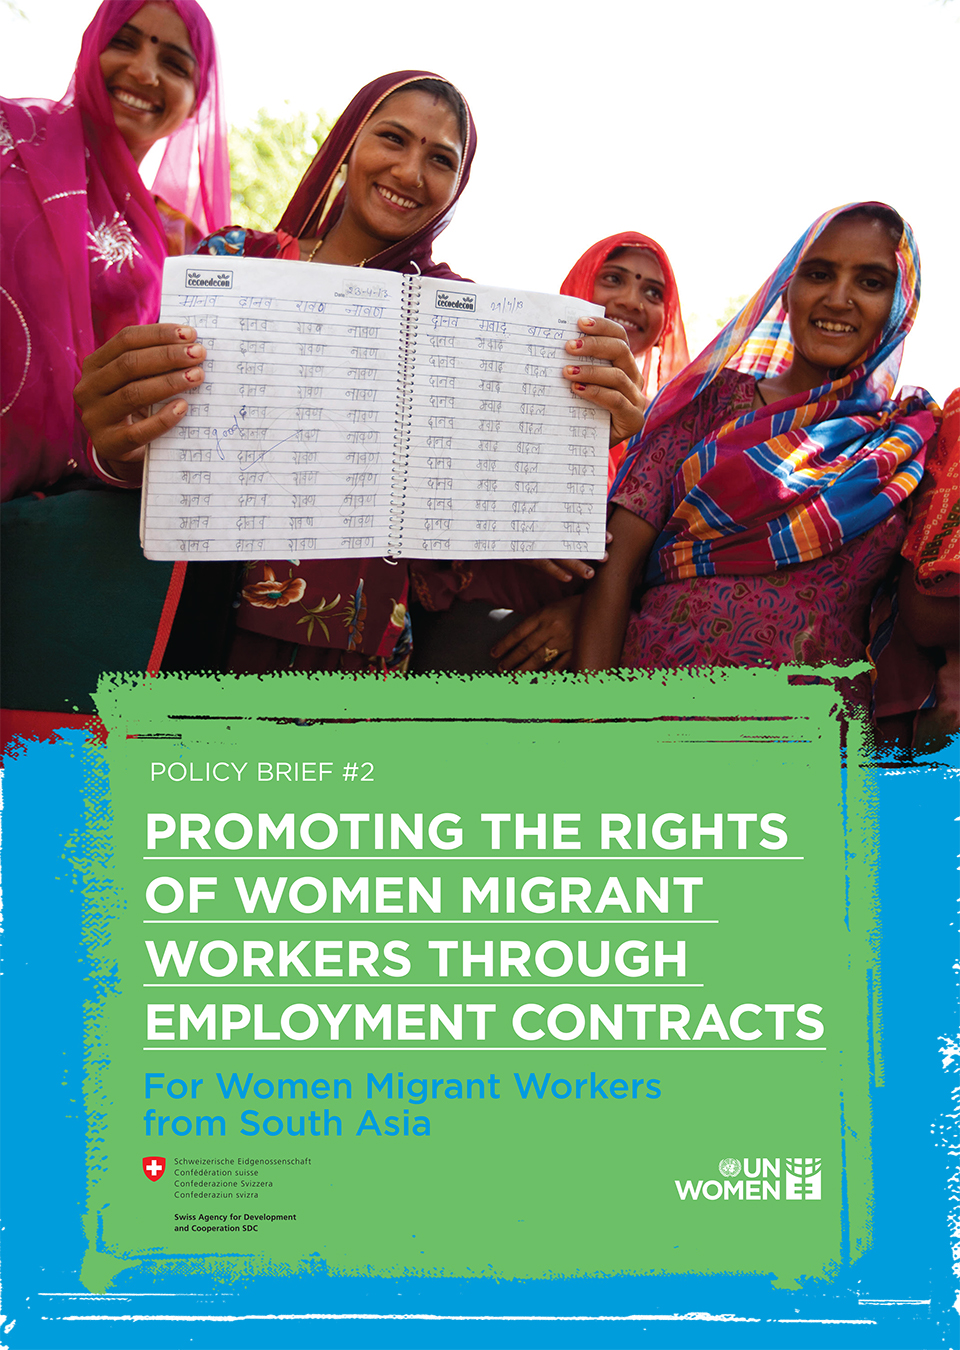 Promoting the Rights of Women Migrant Workers through Employment Contracts